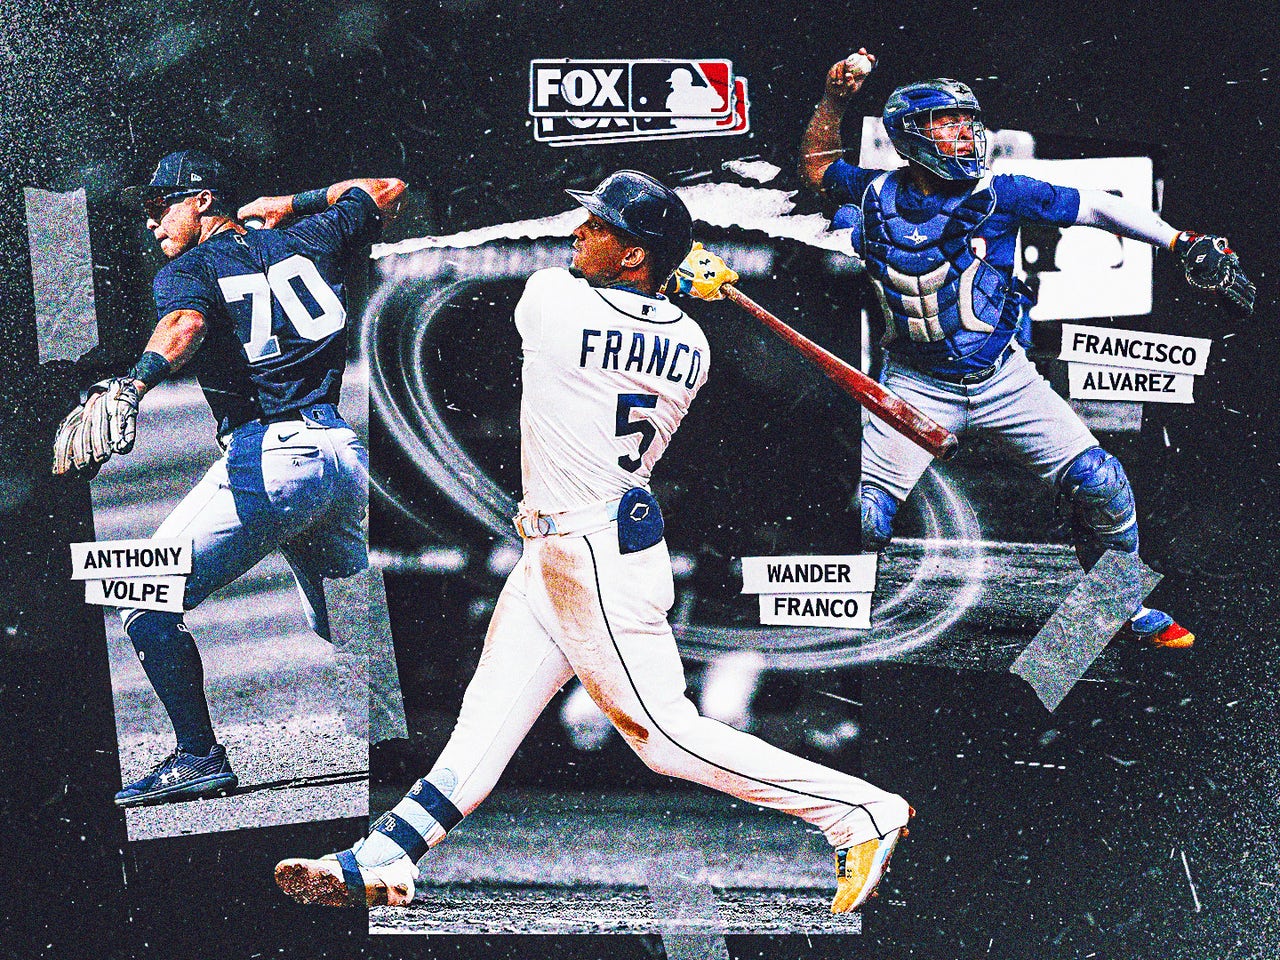 The Wander Franco Show': Behind the rise of baseball's top